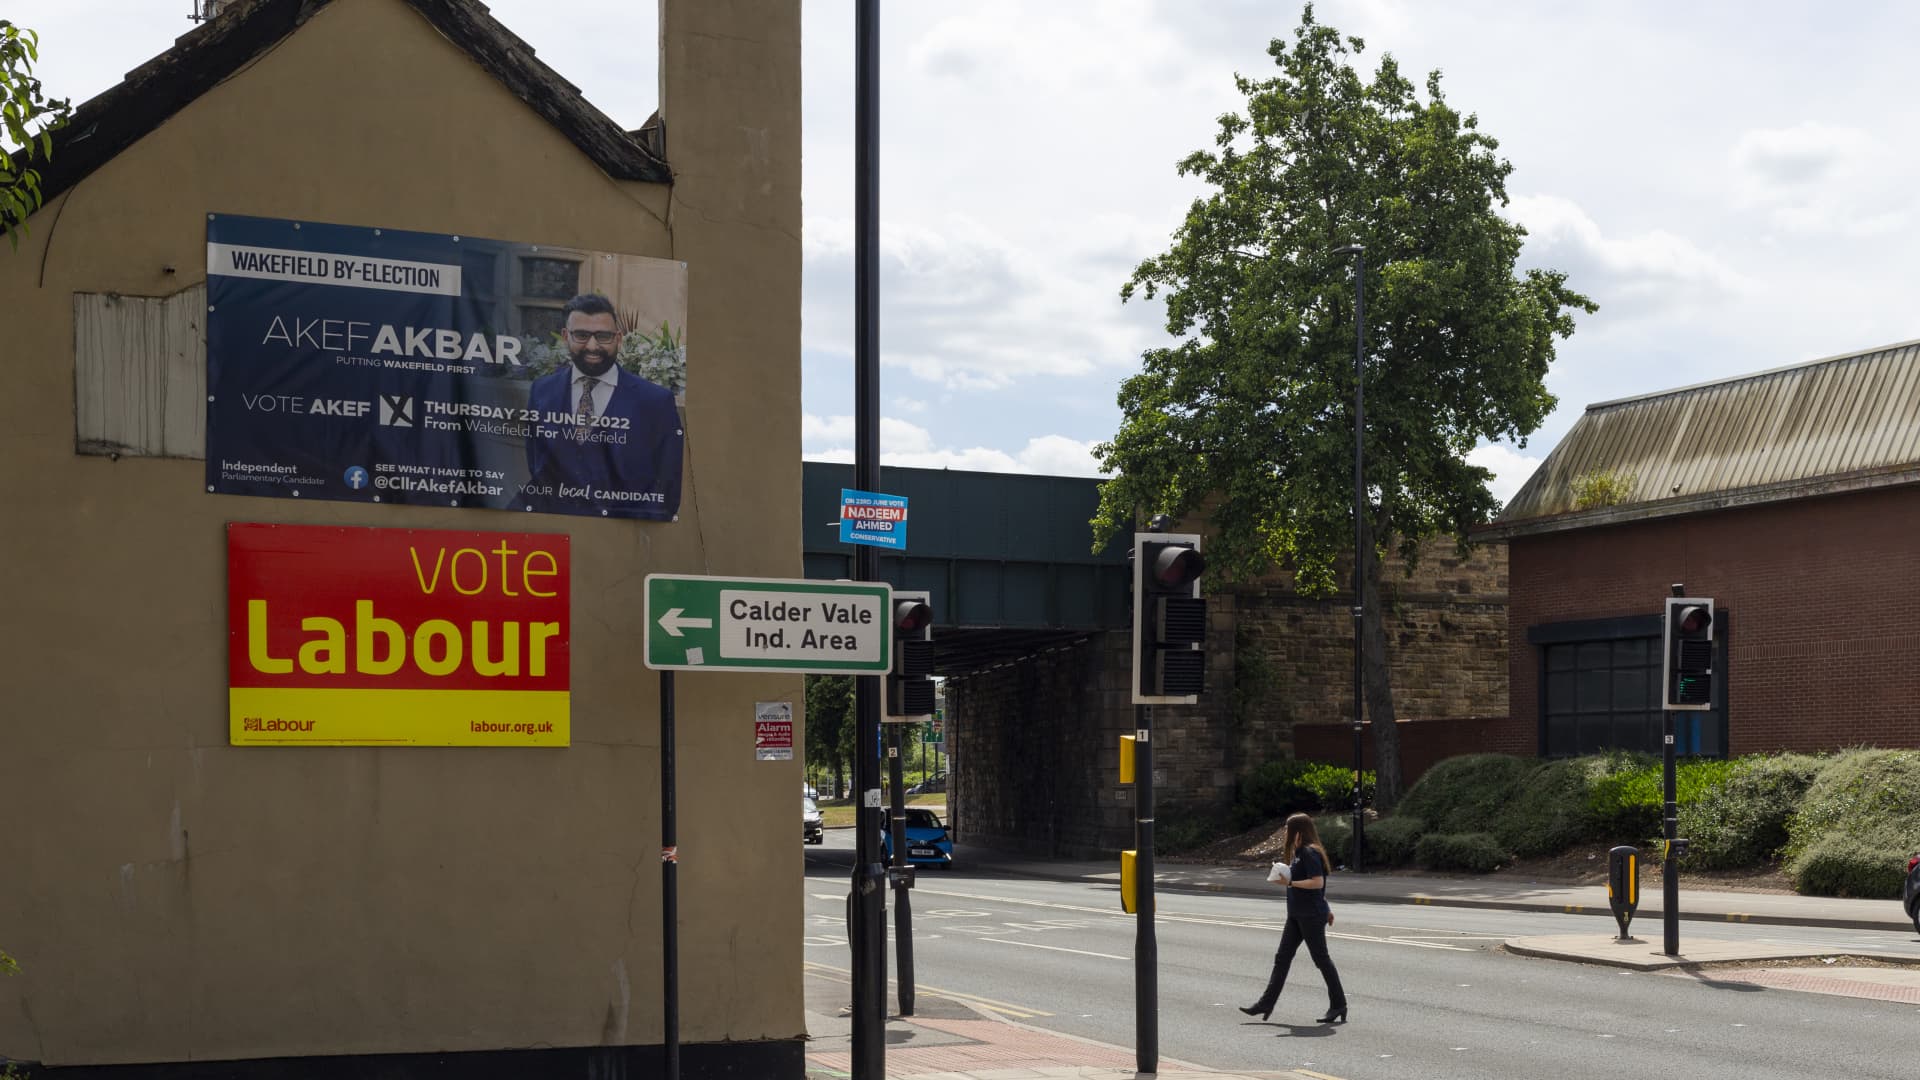 Campaign posters in Wakefield, West Yorkshire, ahead of a key by-election triggered after Conservative MP Imran Ahmed Khan was convicted of sexually assaulting a minor.